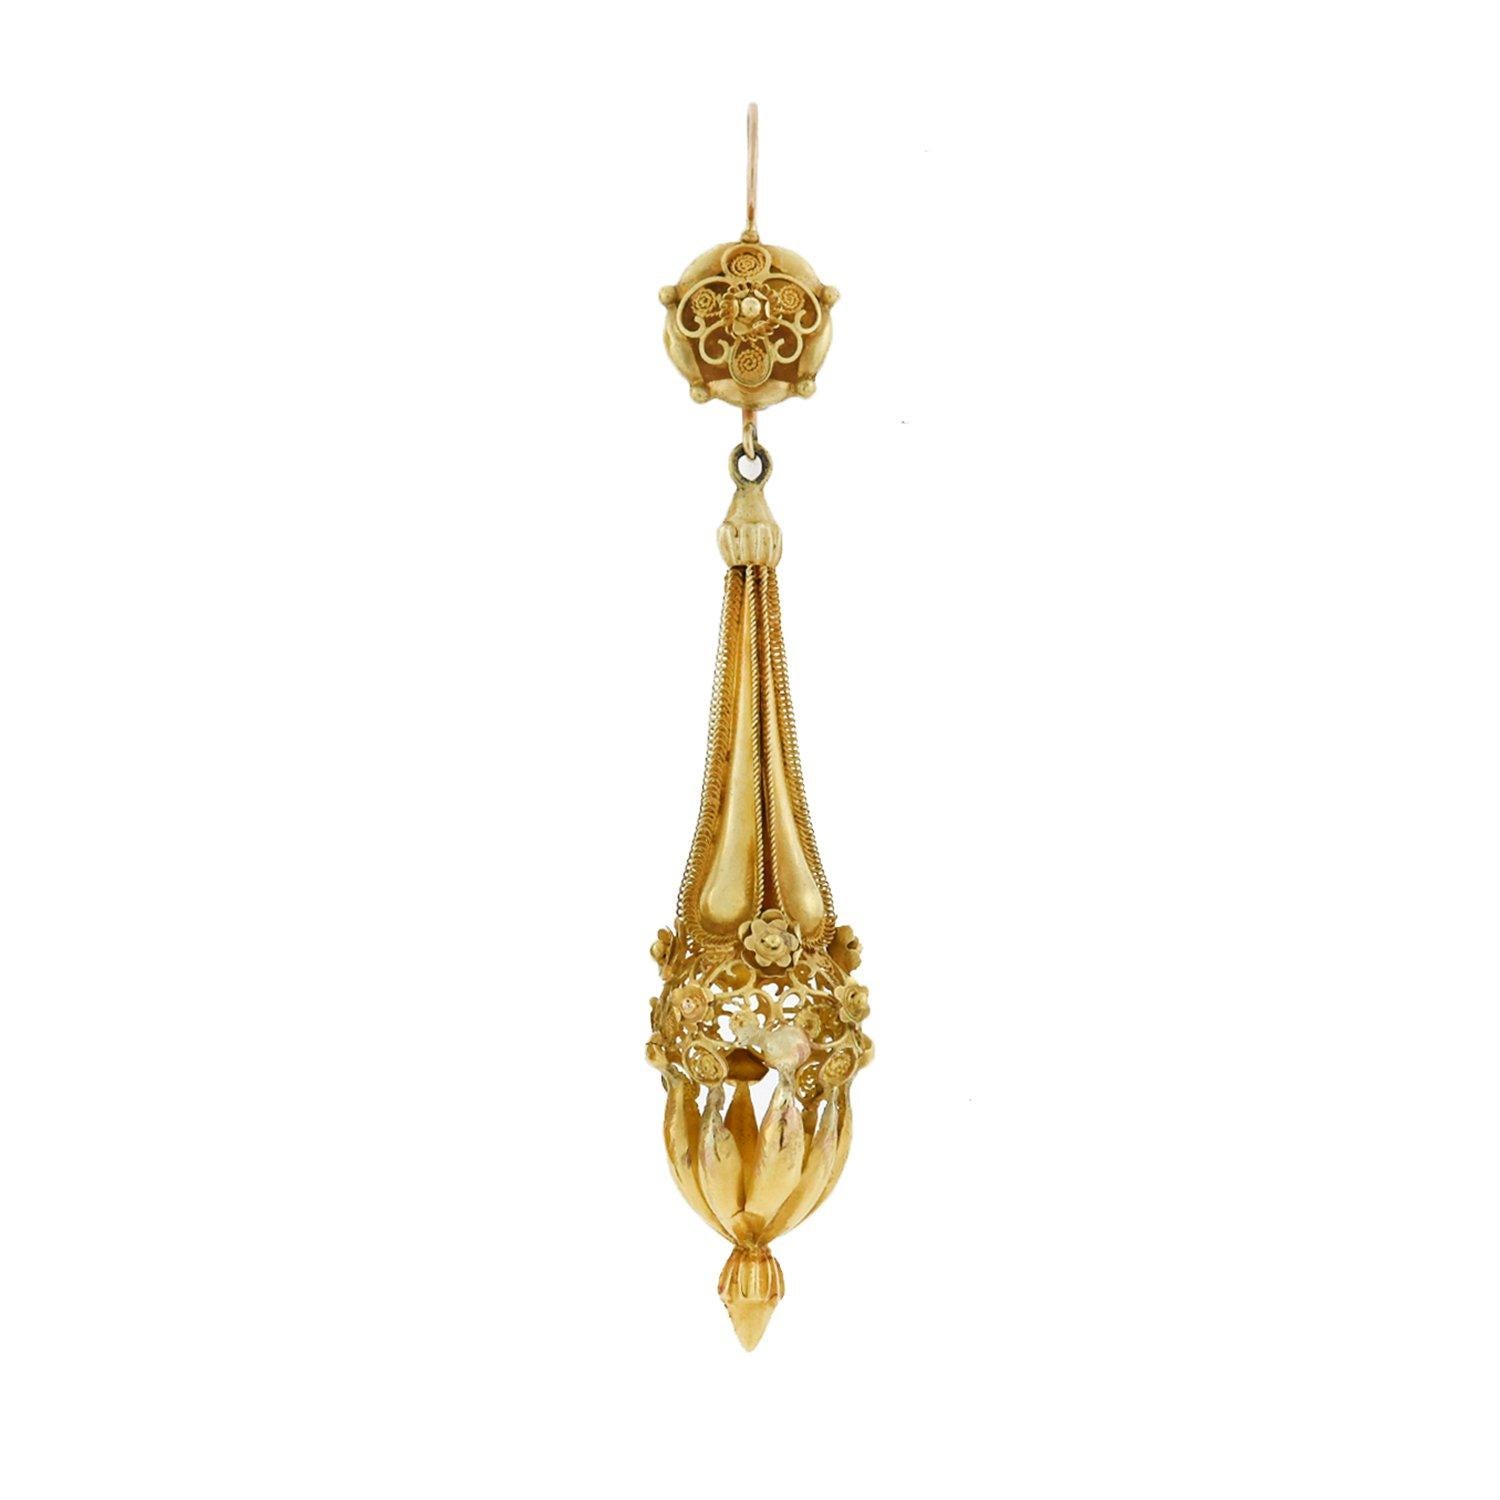 An exquisite pair of dramatic gold earrings from the Victorian (ca1880) era! These fantastic earrings are crafted in vibrant 18kt yellow gold and have an elongated torpedo style design. A long link hangs from a simple earring wire and decorative